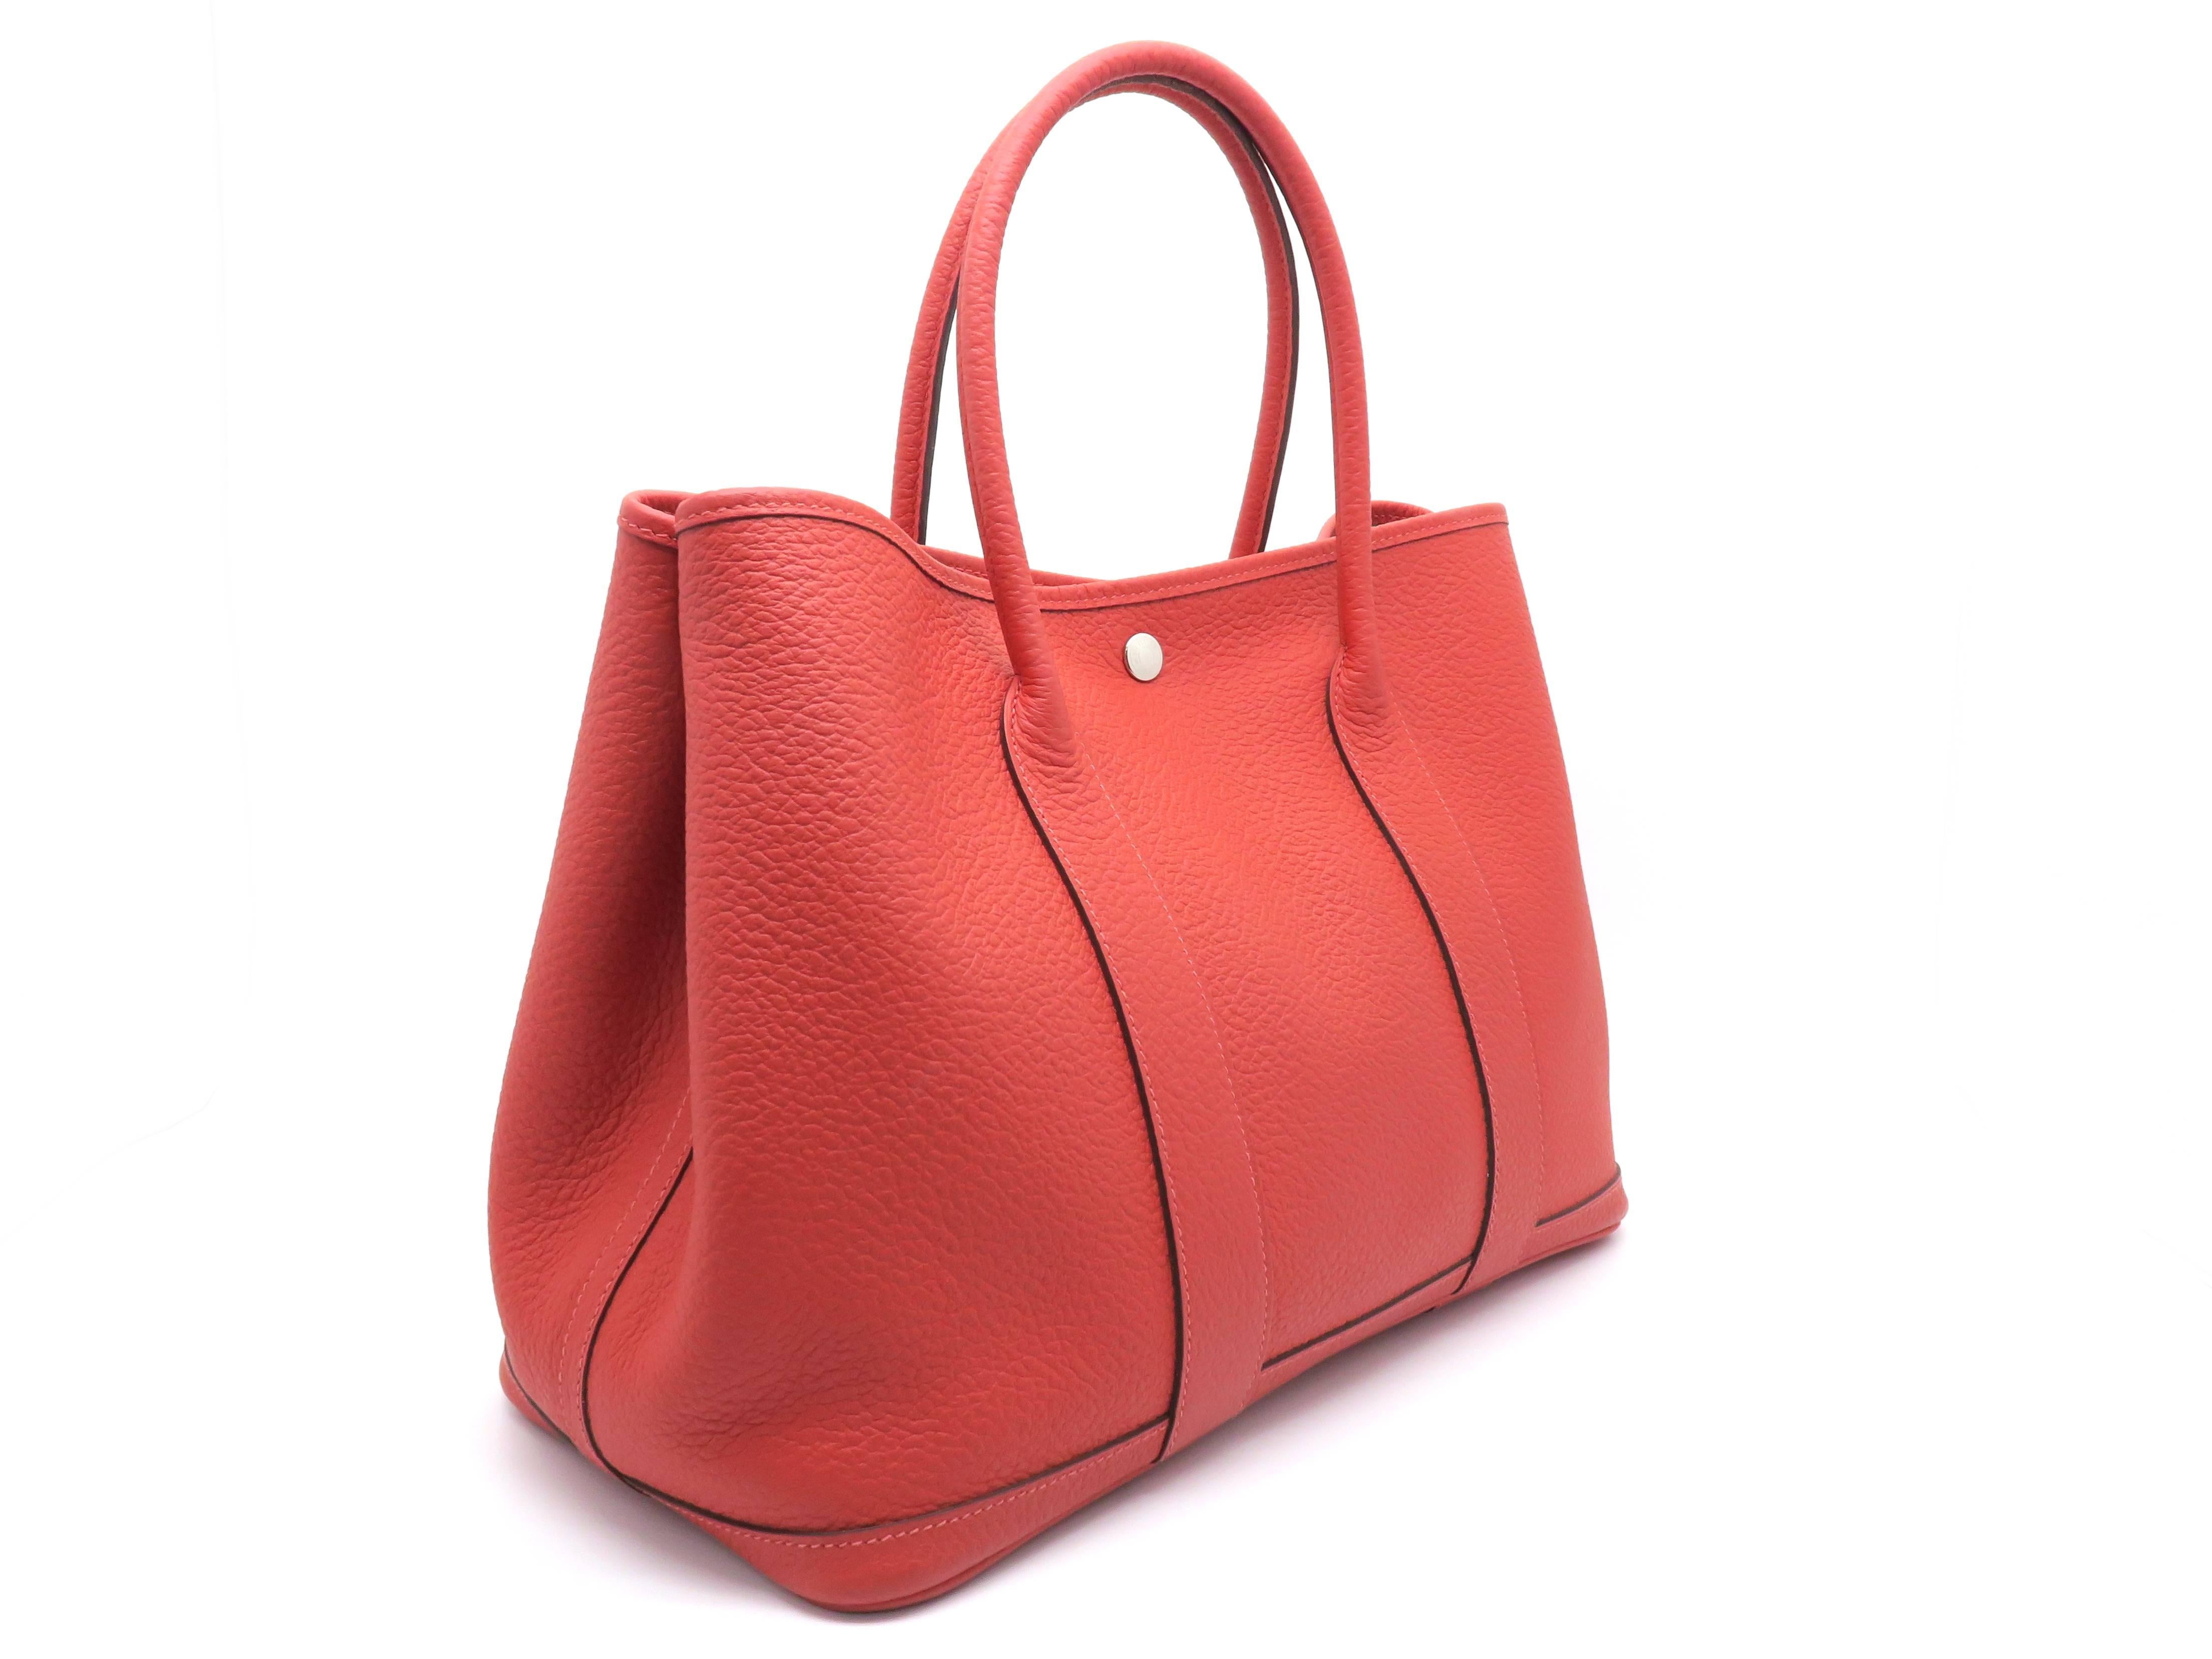 Color: Rouge Pivoine ( Design Color ) /Red

Material: Country Leather

Condition: Rank B 
Overall: Fair. Few defects
Surface: Good
Corners: Obvious Stains
Edges: Minor Stains
Handles/Straps: Good
Hardware: Minor Scratches

Dimension: W36 × H26 ×